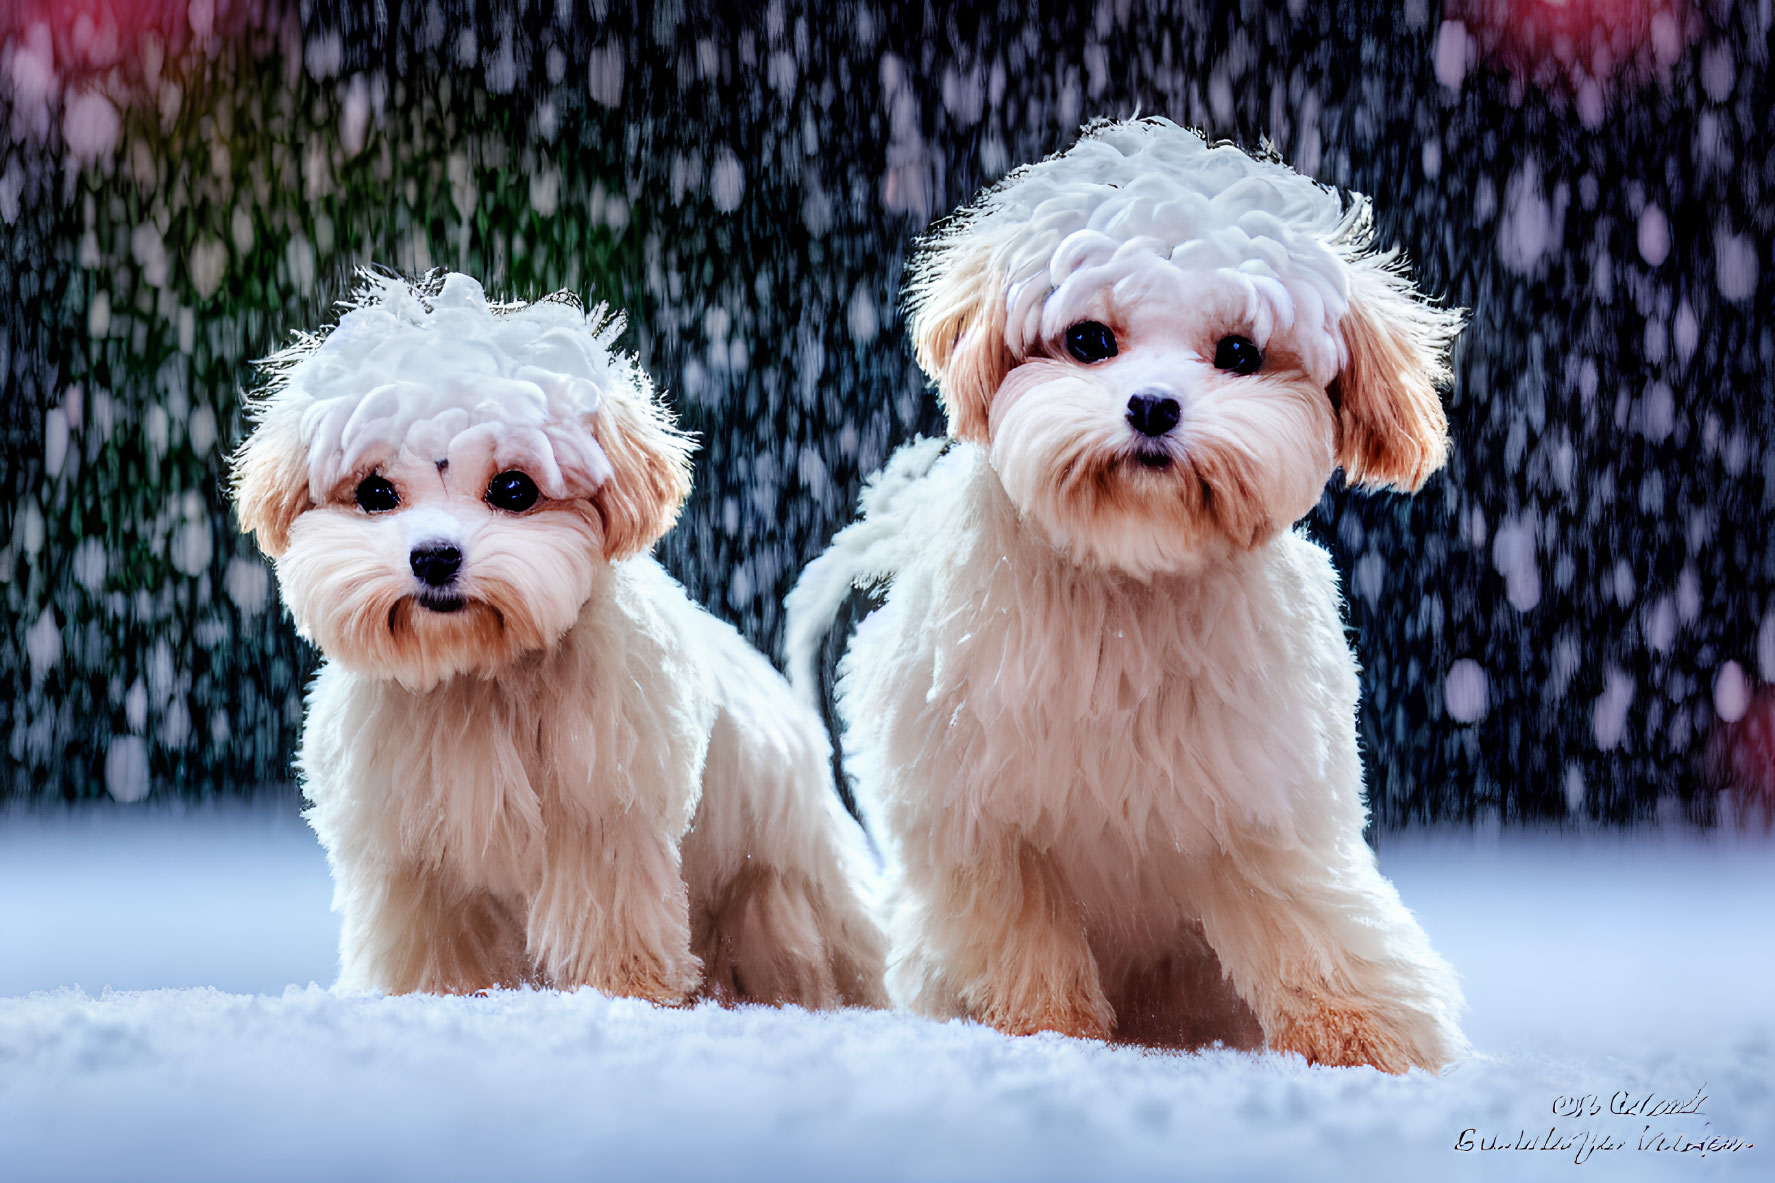 Fluffy white dogs sitting in snow with falling snowflakes